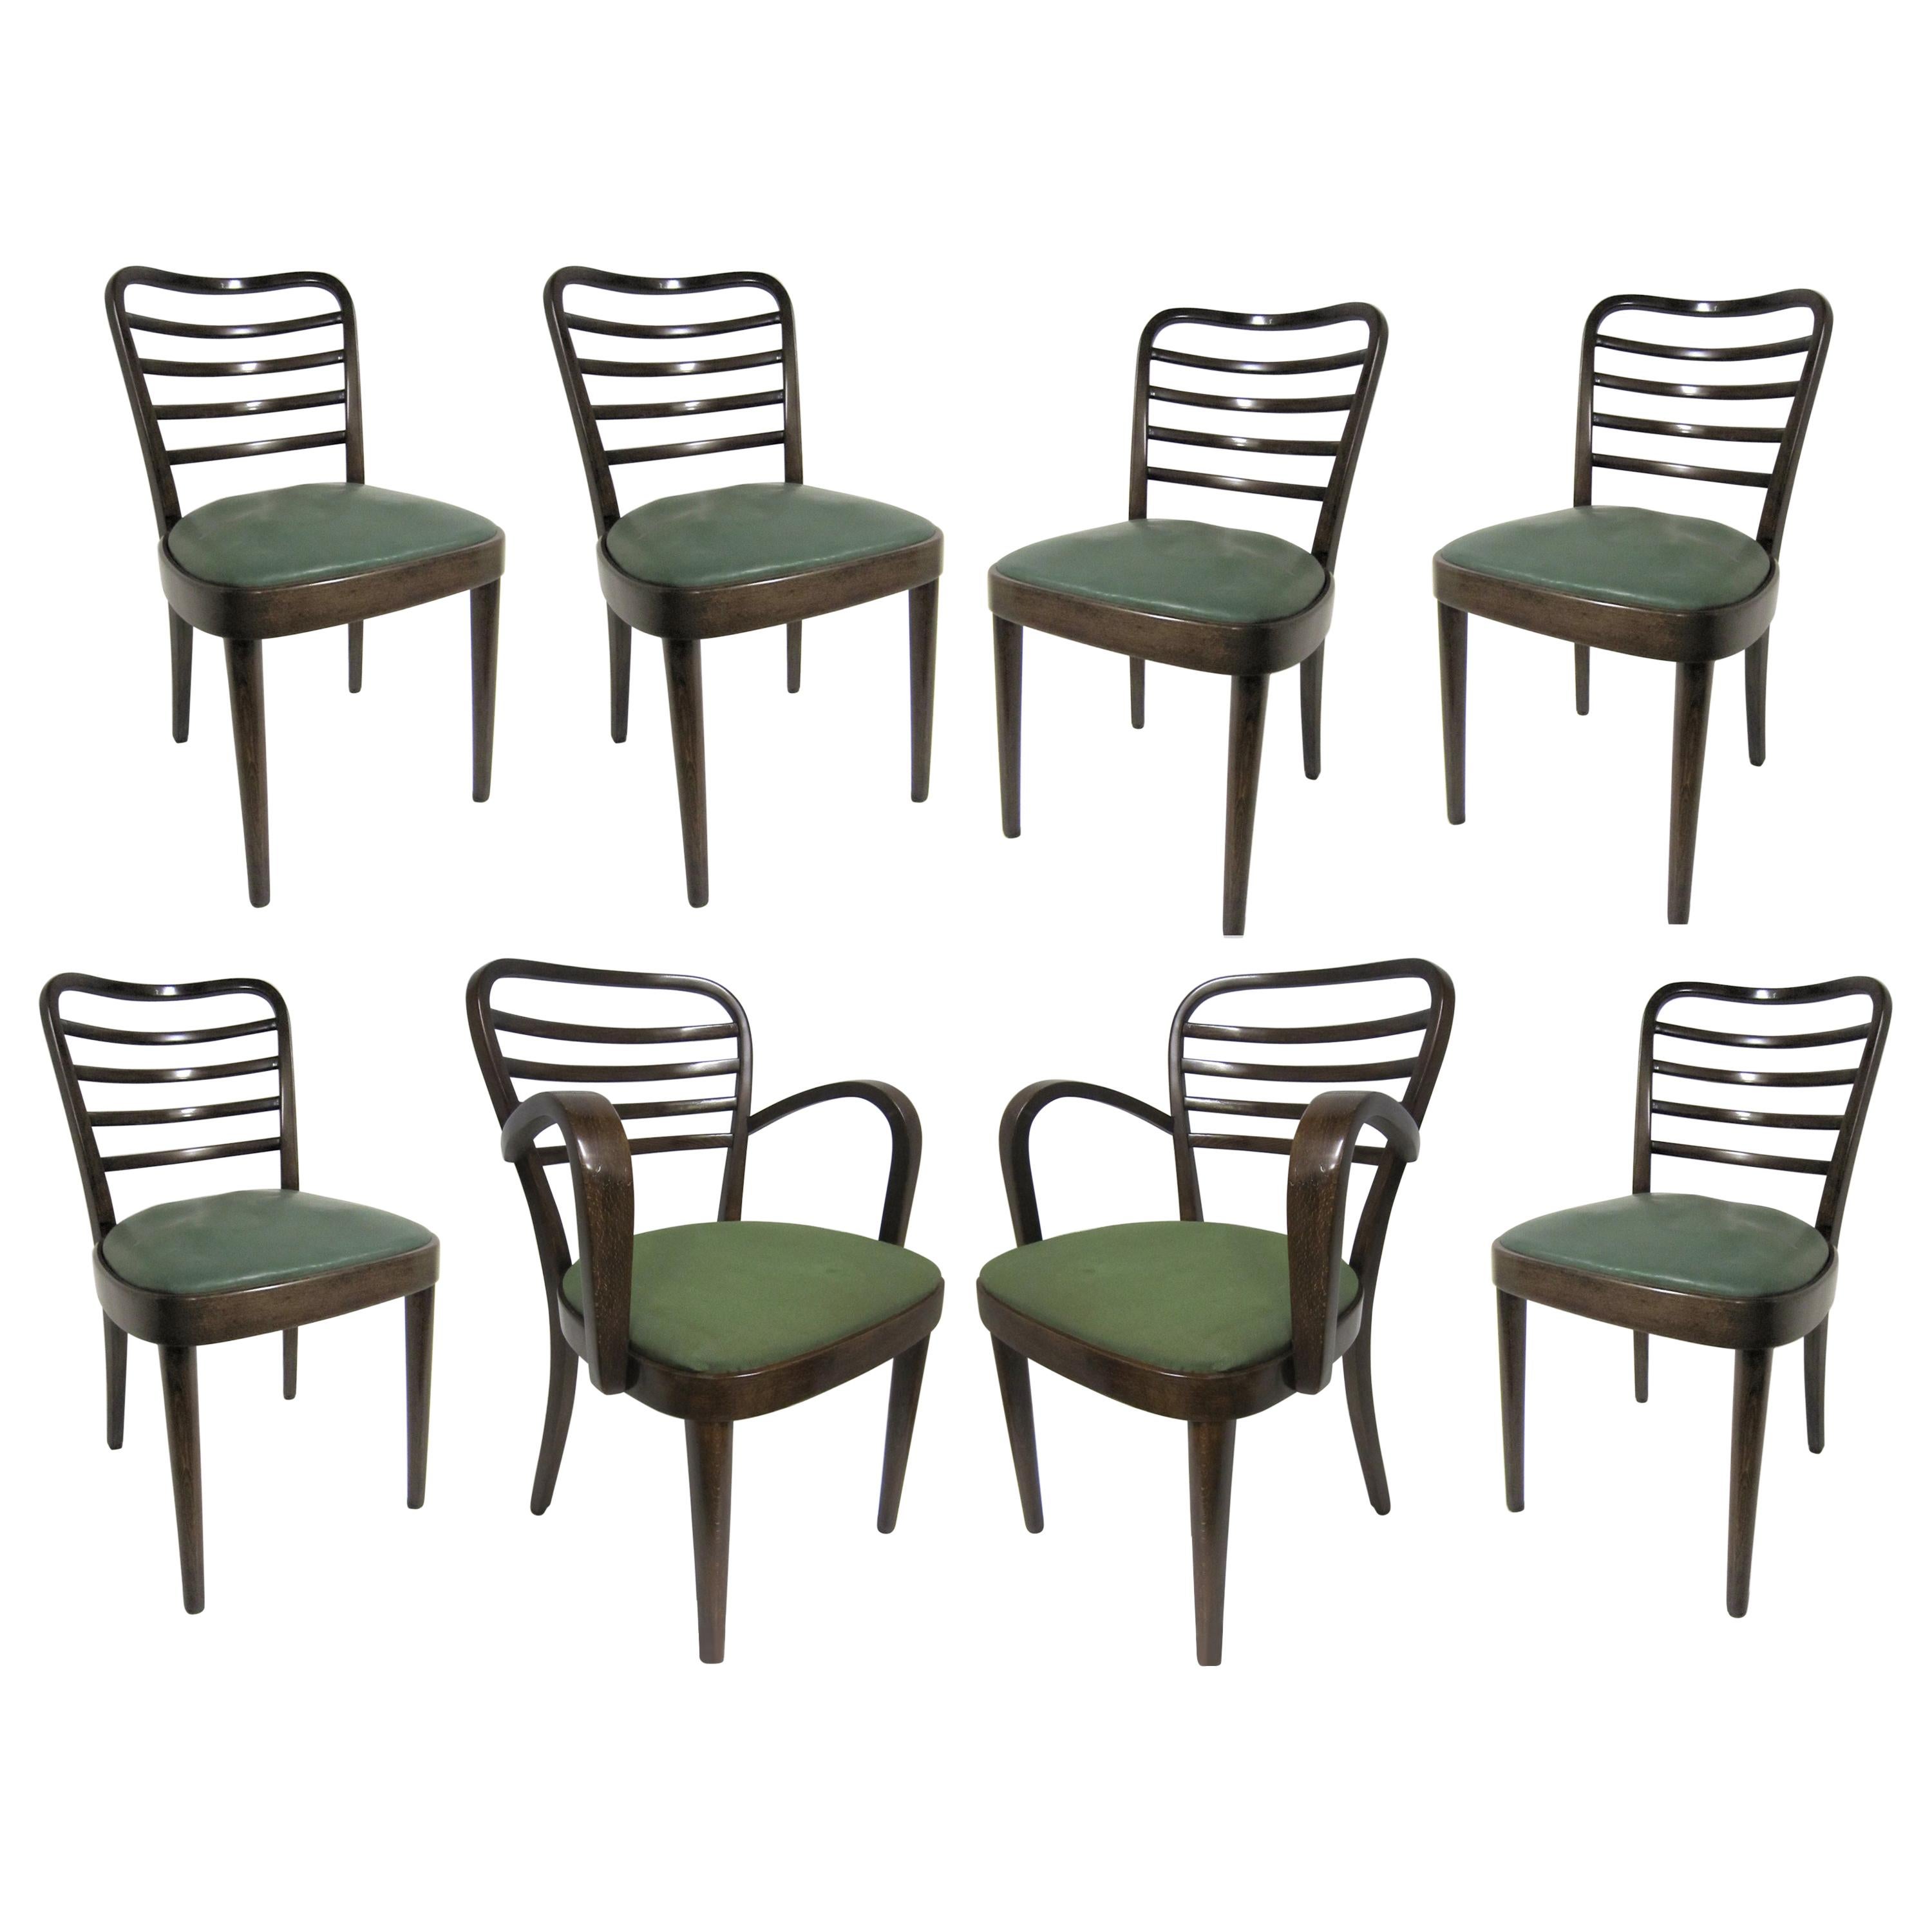 Set of Eight Original Josef Frank Bentwood Chairs, Six Sides and Two Arms